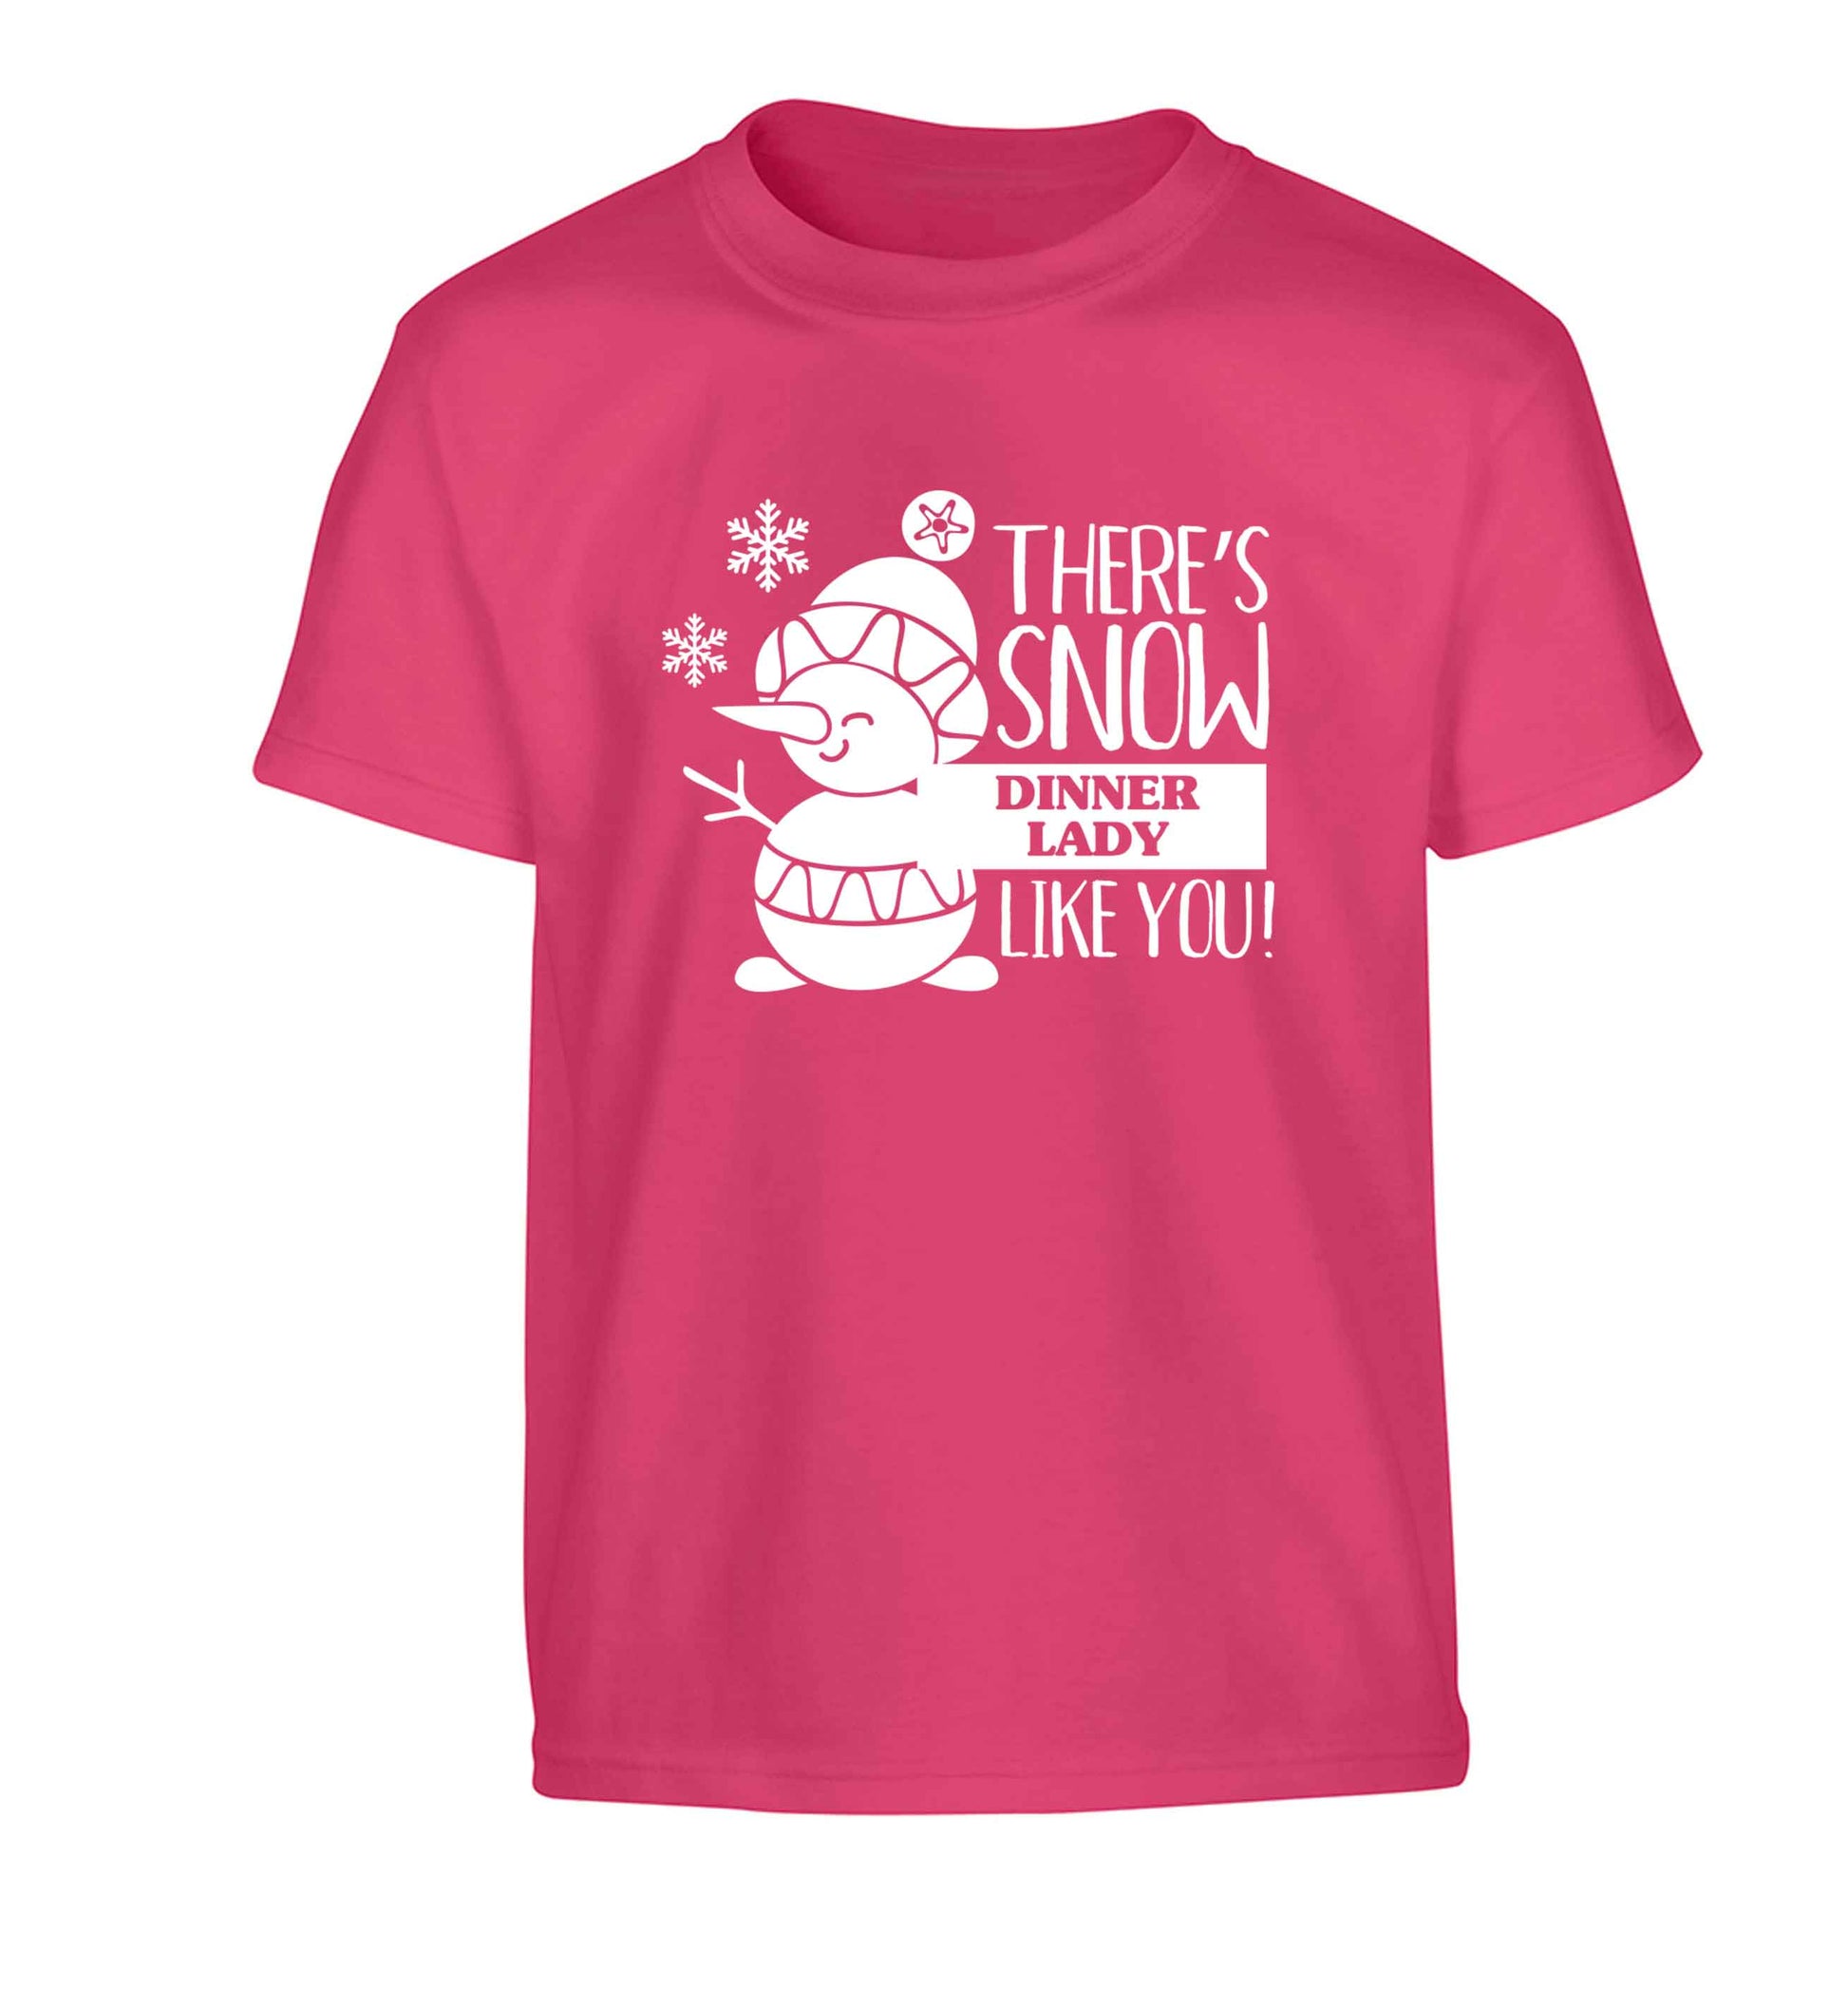 There's snow dinner lady like you Children's pink Tshirt 12-13 Years